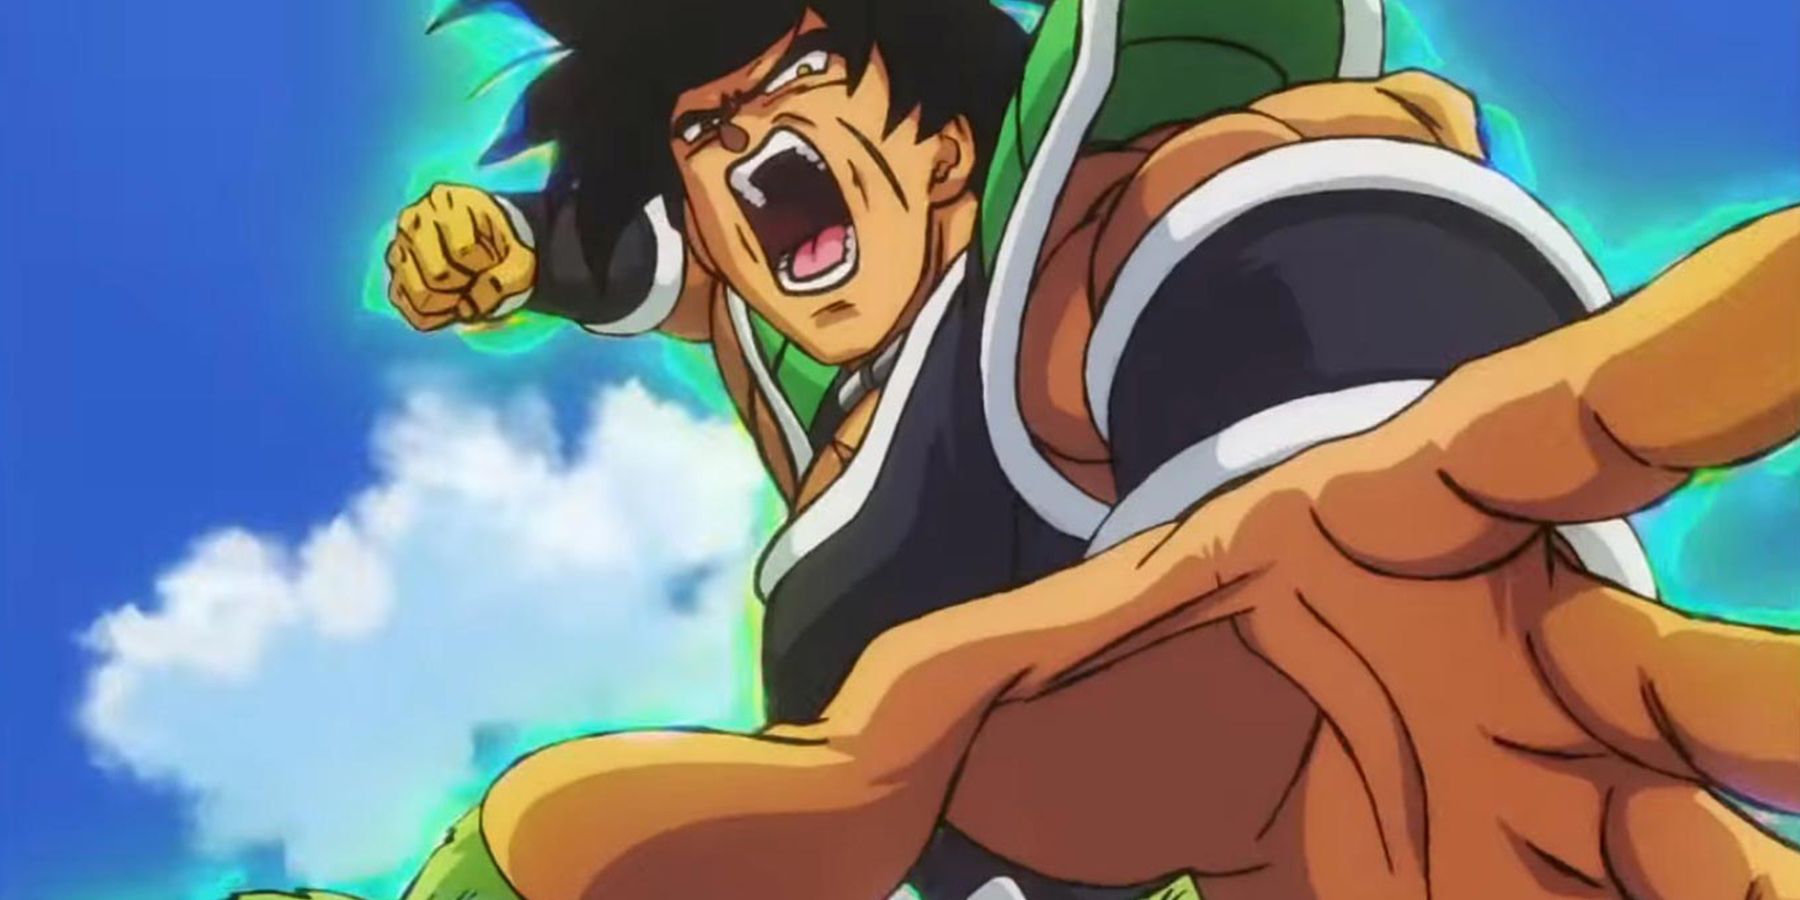 Broly releases a major punch in Dragon Ball Super: Broly